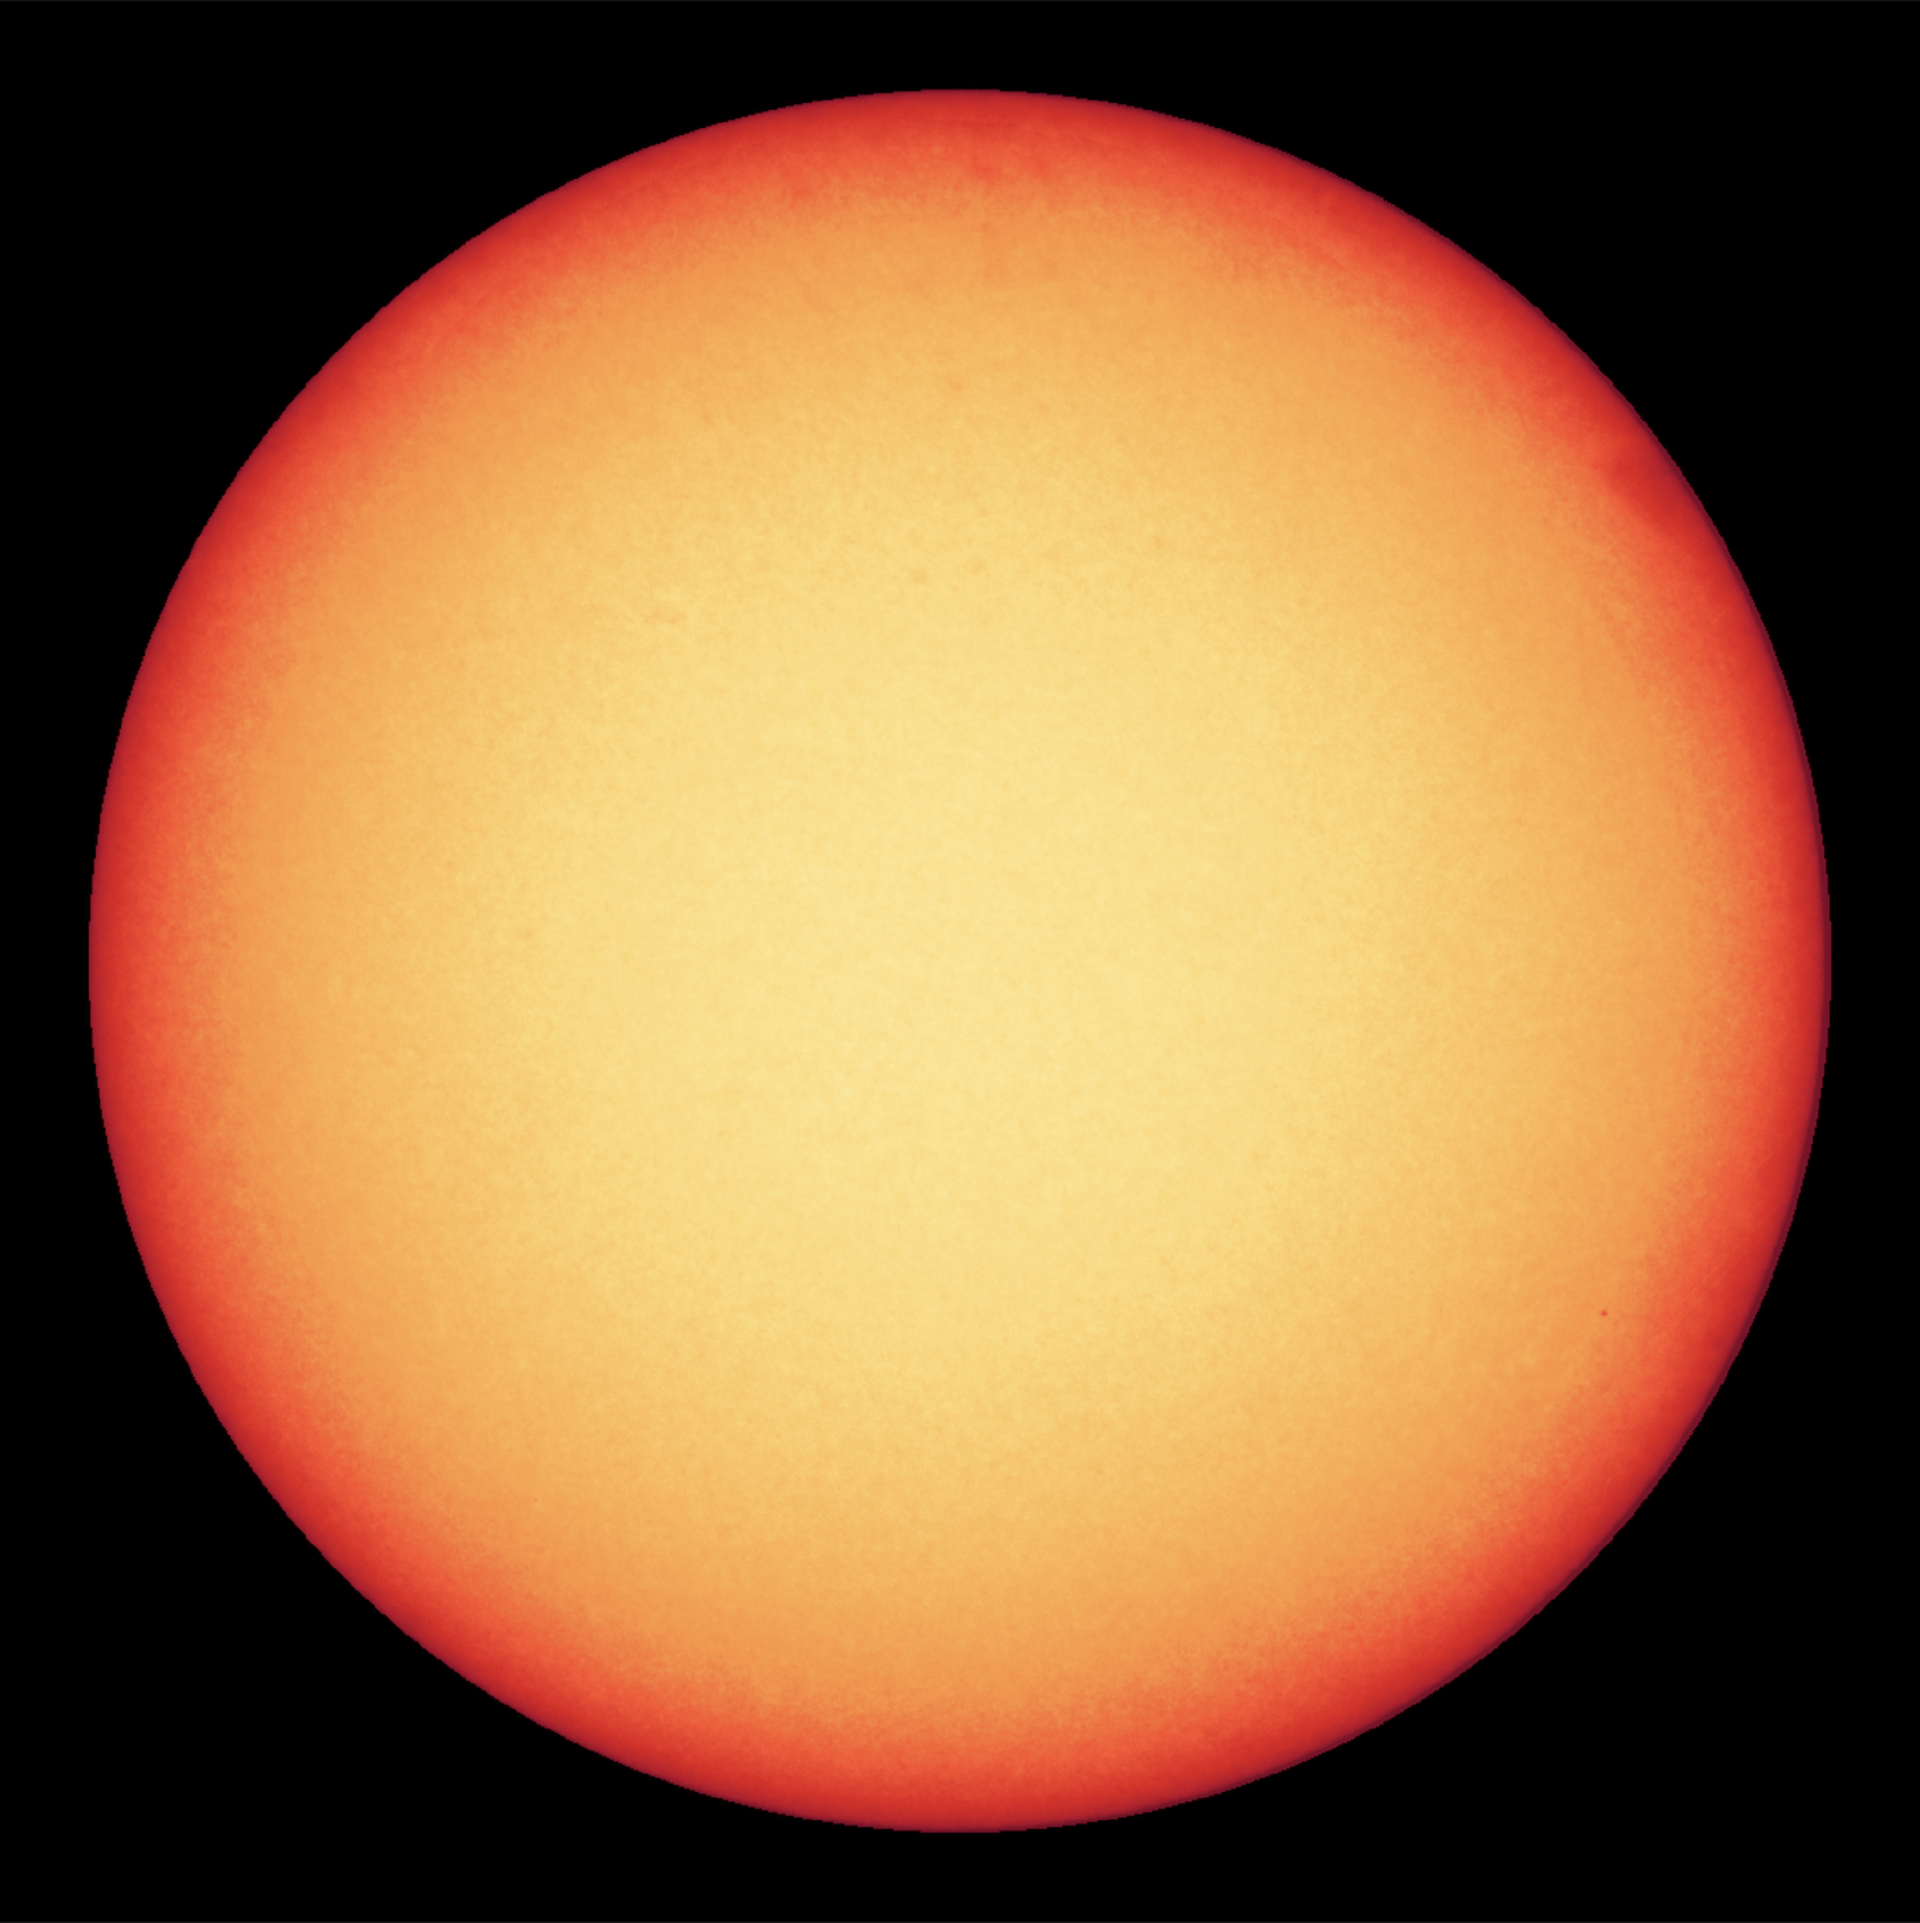 The Sun viewed by Solar Orbiter’s PHI instrument